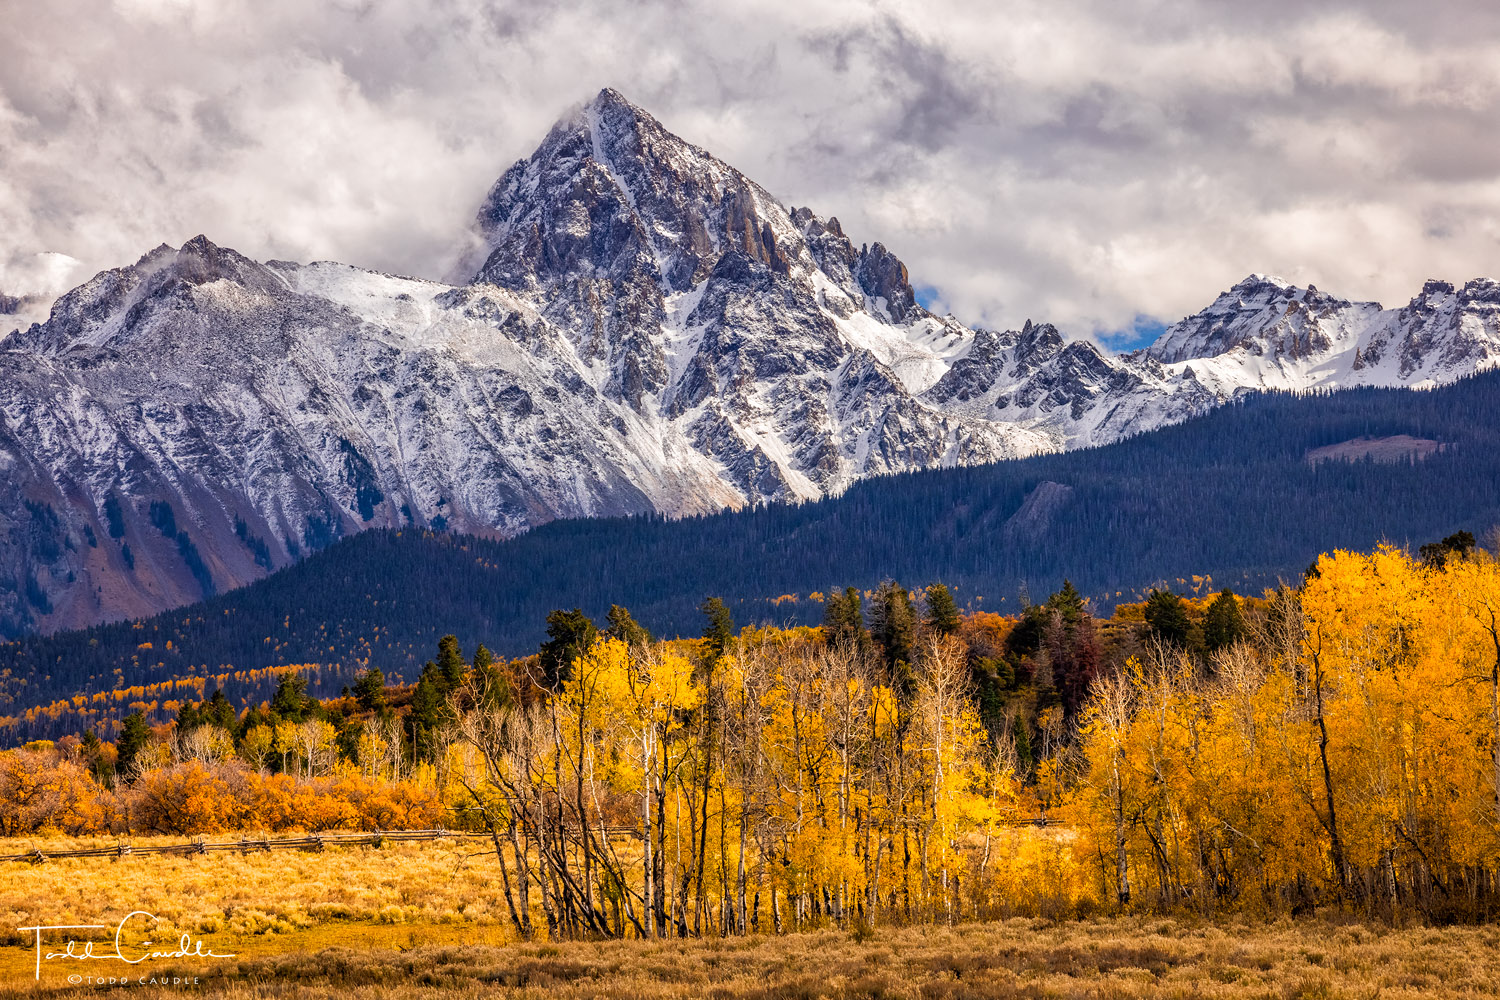 Majestic Mount Sneffels rises above fall colors on Dallas Divide.